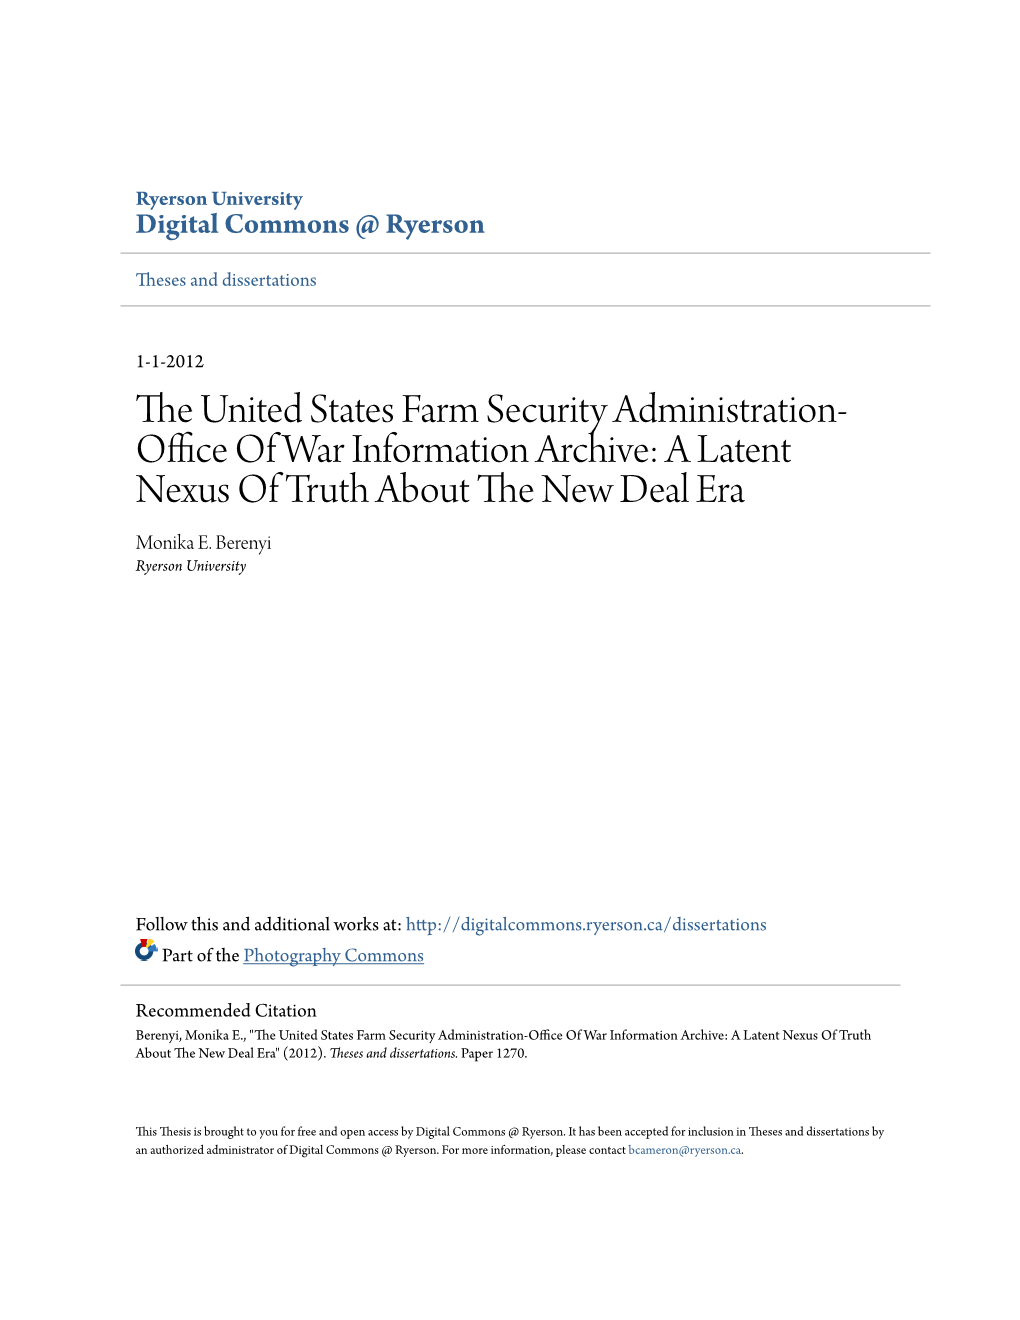 The United States Farm Security Administration-Office of War Information Archive: a Latent Nexus of Truth About the New Deal Era